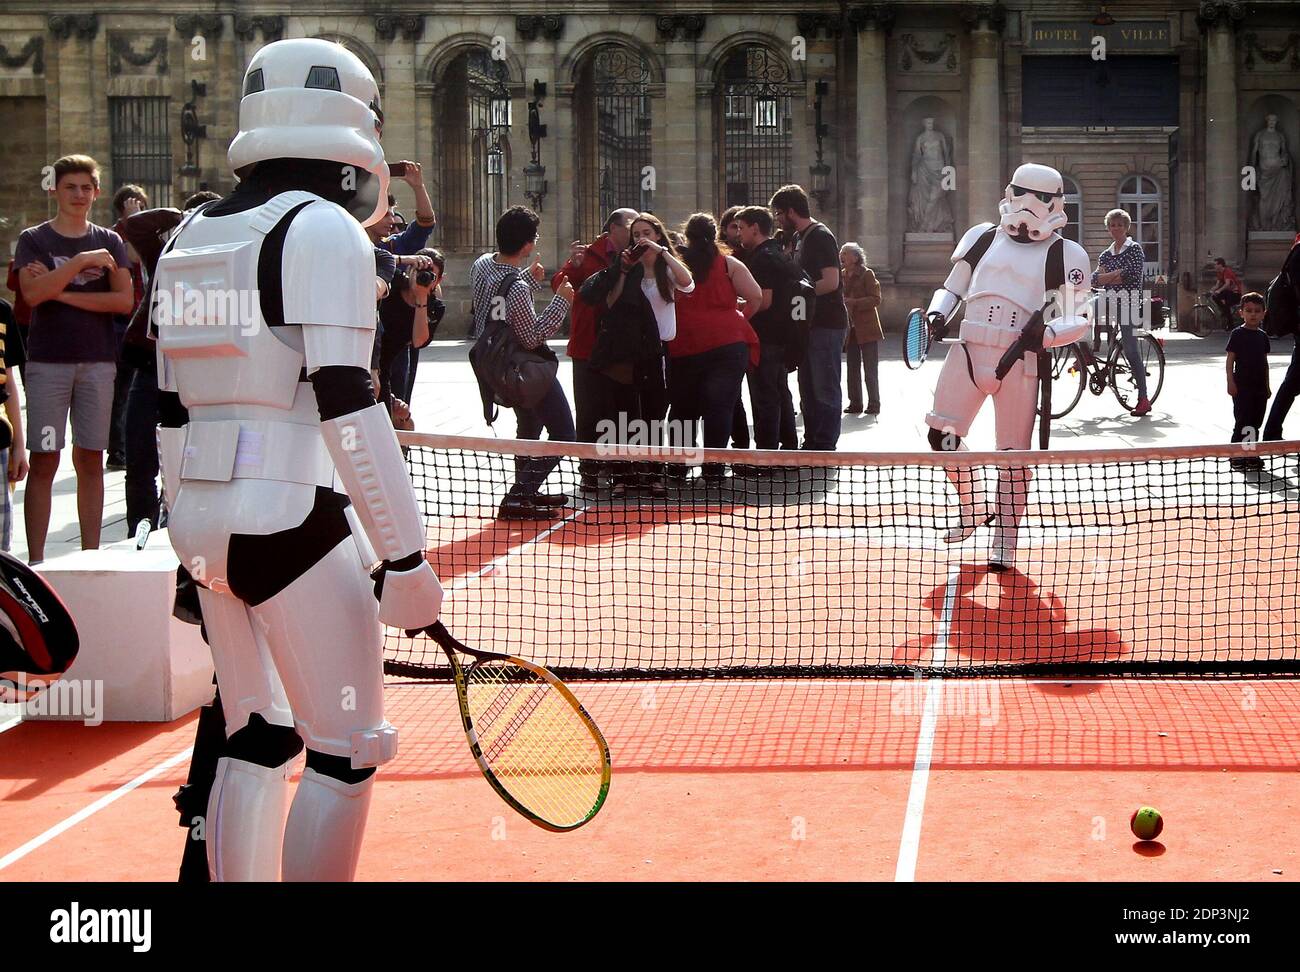 Star Wars' figures play tennis on an ephemeral court as part of 'May the  4th' ('May The Force Be With You') celebration to promote the 2015 BNP  Paribas Primrose tennis tournament to